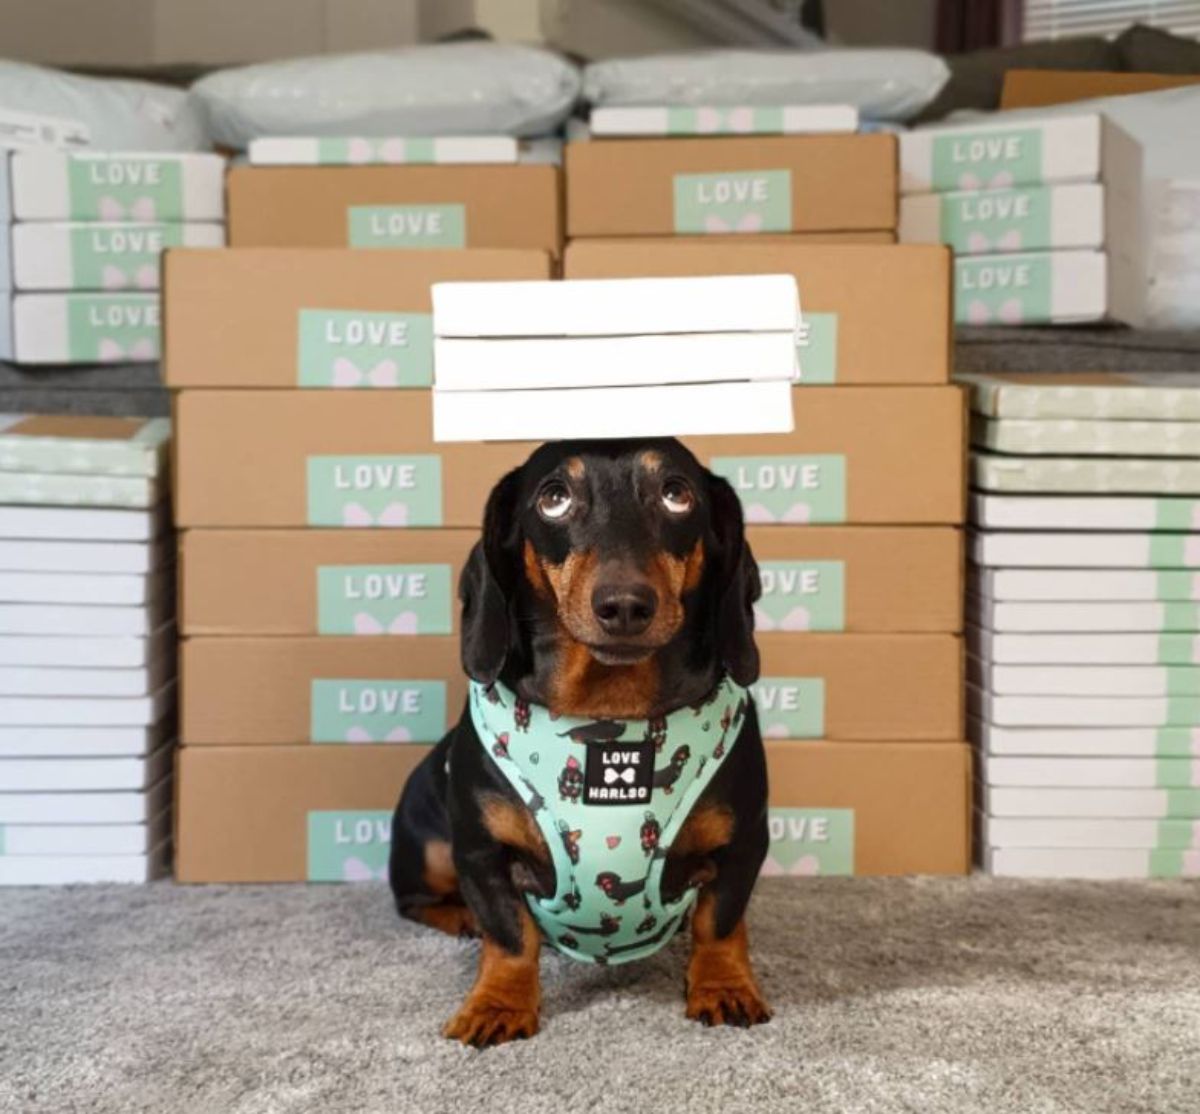 black and brown dachshund standing with 3 rectangluar white boxes on the head and wearing a green harness with black and brown dachshunds on it